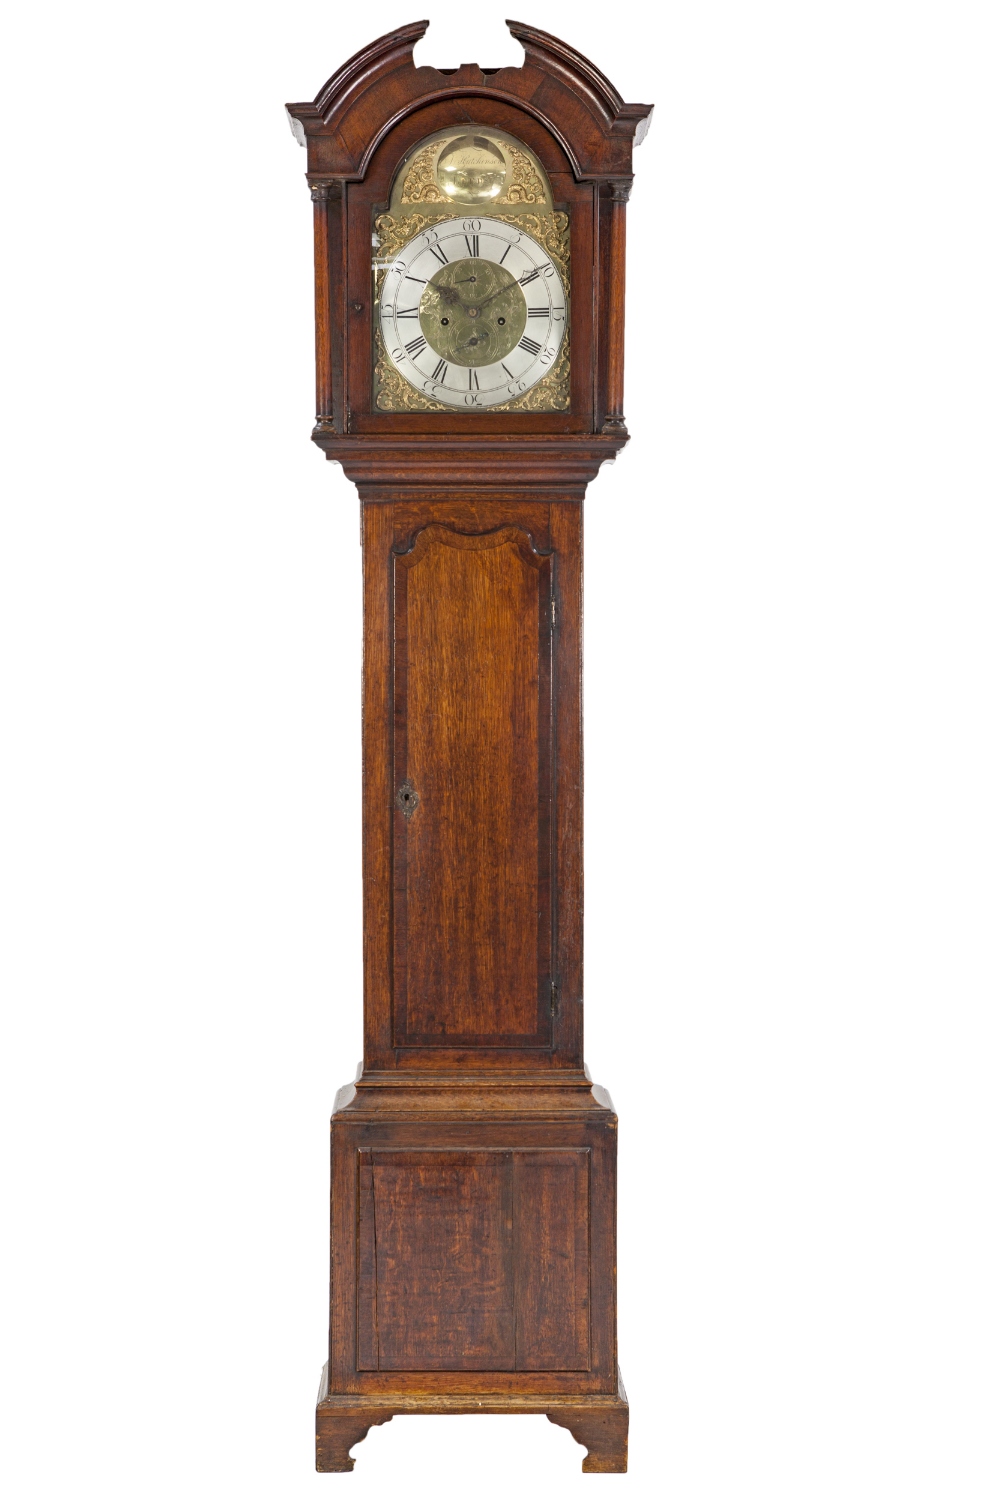 LATE EIGHTEENTH CENTURY OAK AND MAHOGANY CROSSBANDED LONGCASE CLOCK SIGNED A. HUTCHINSON, LEEDS, the